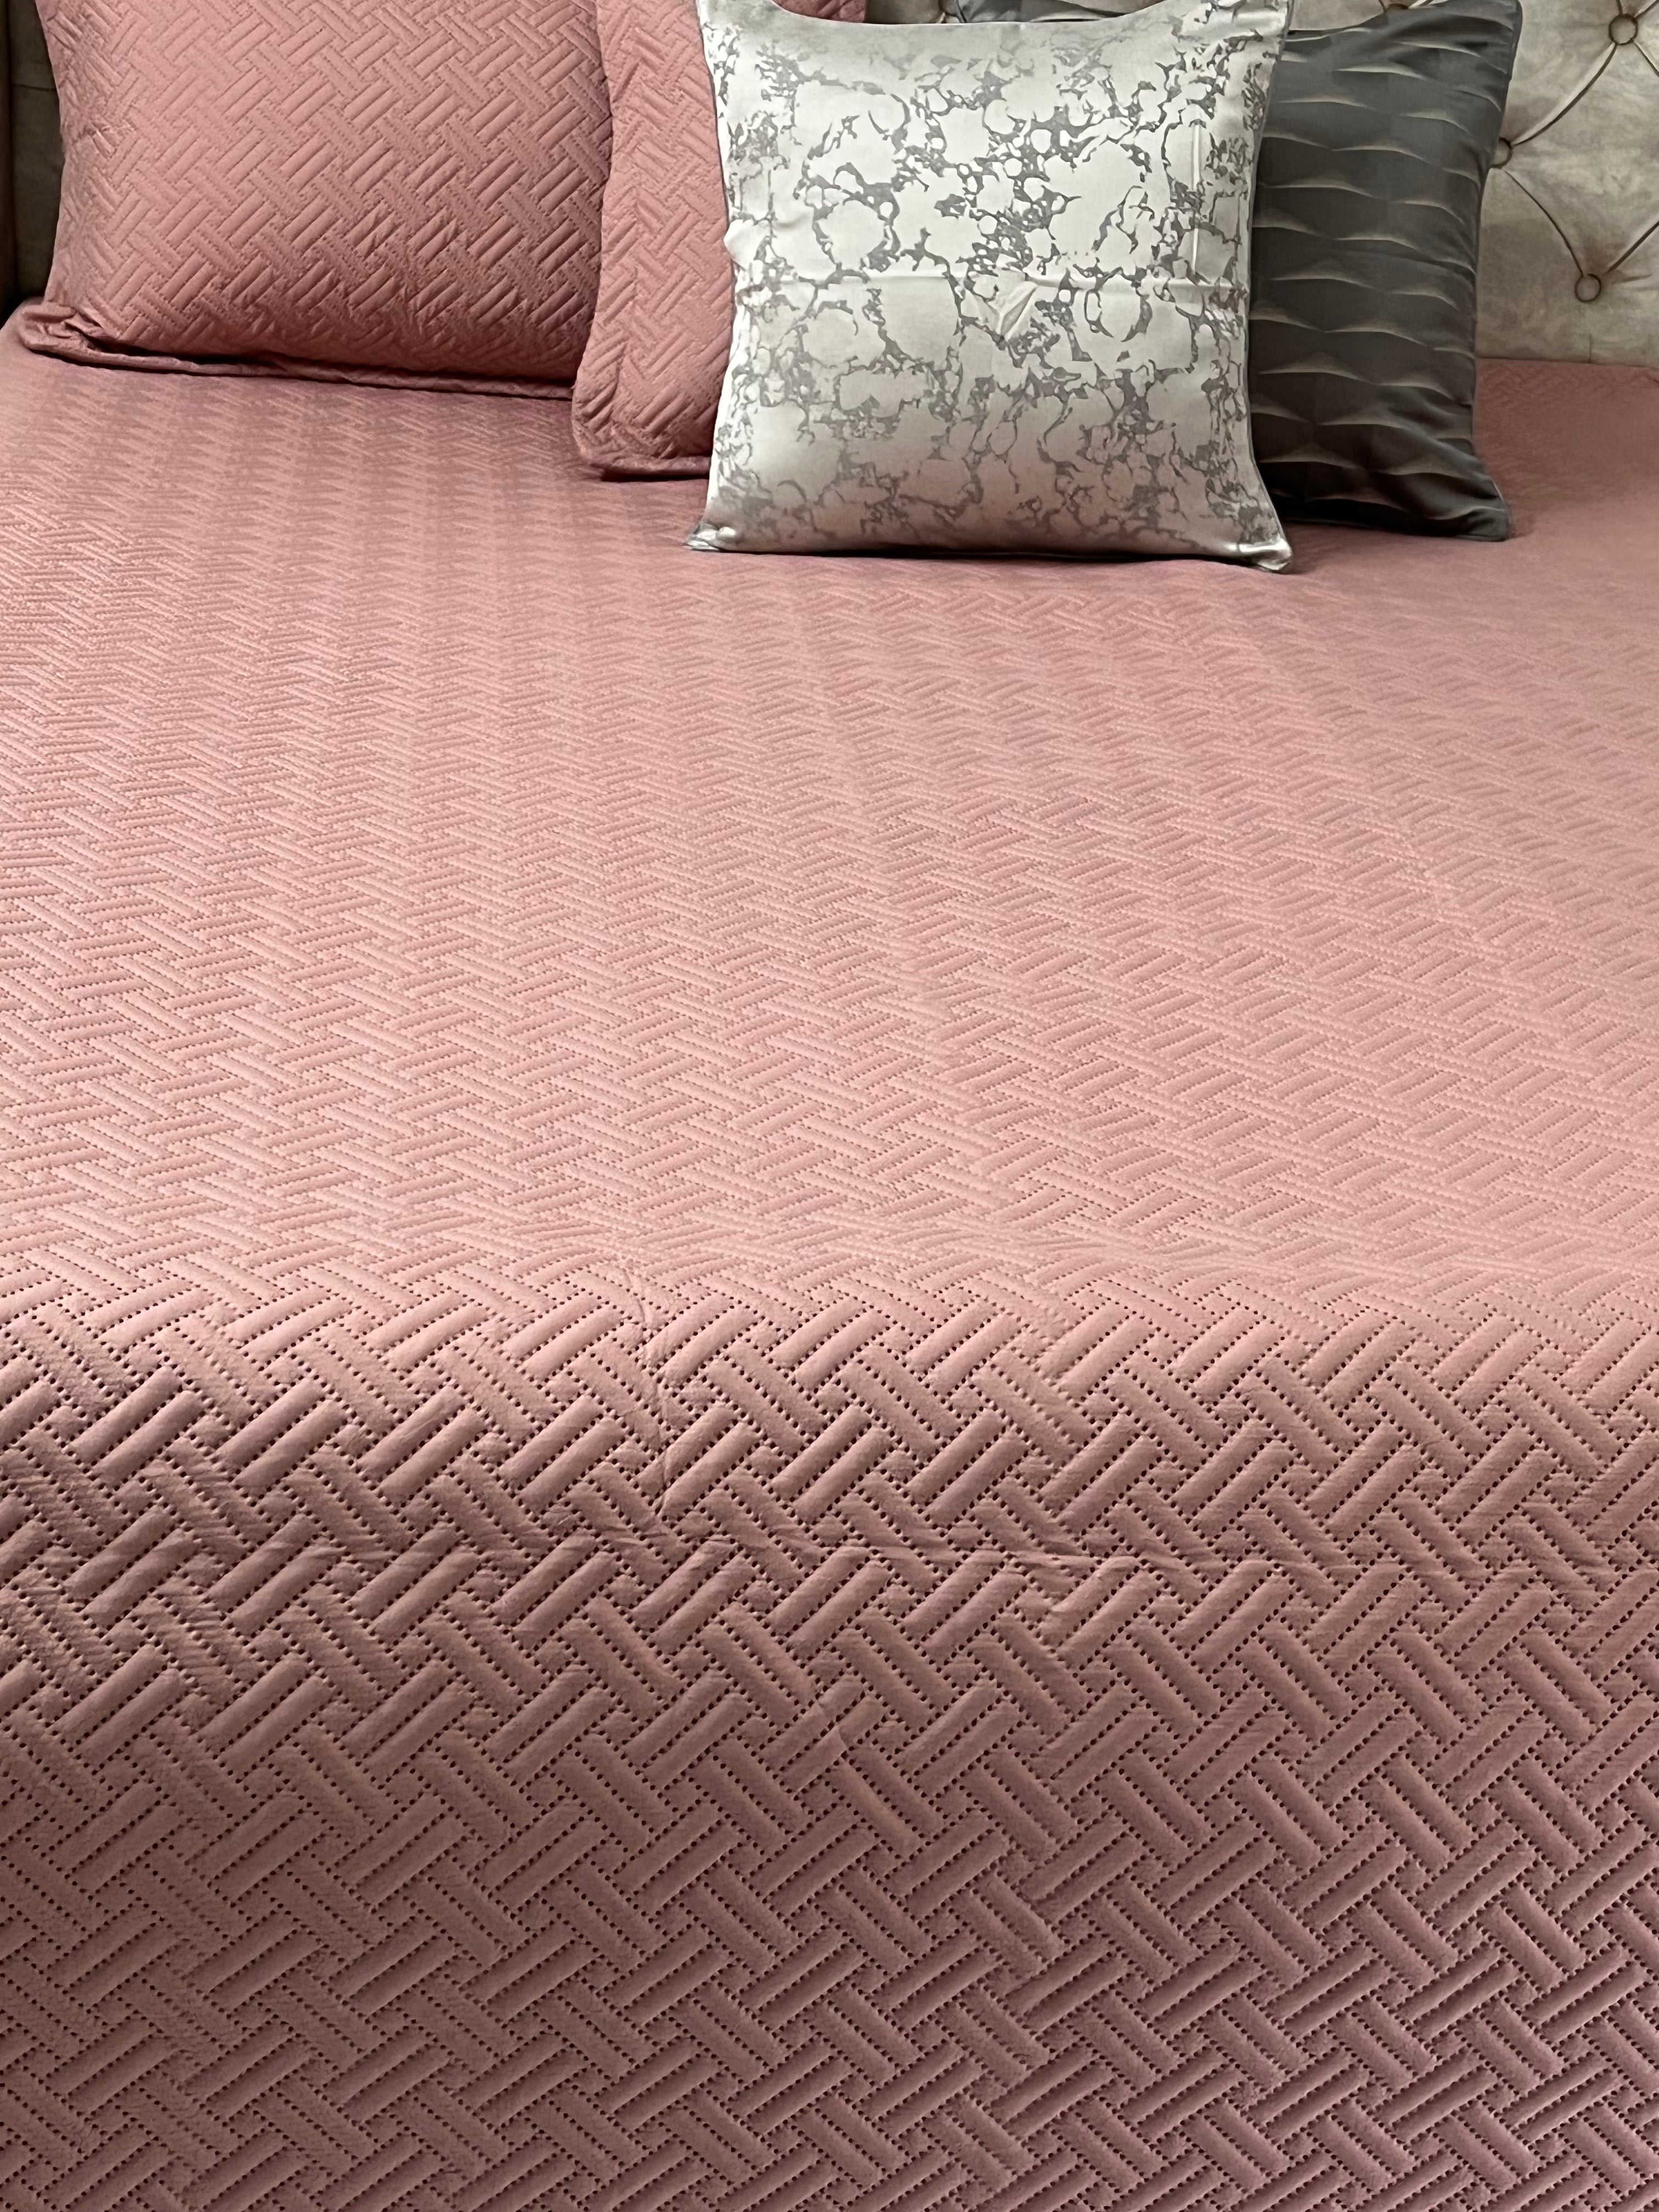 Powder Pink Ultrasonic King Size Bedspread 90x100 inches